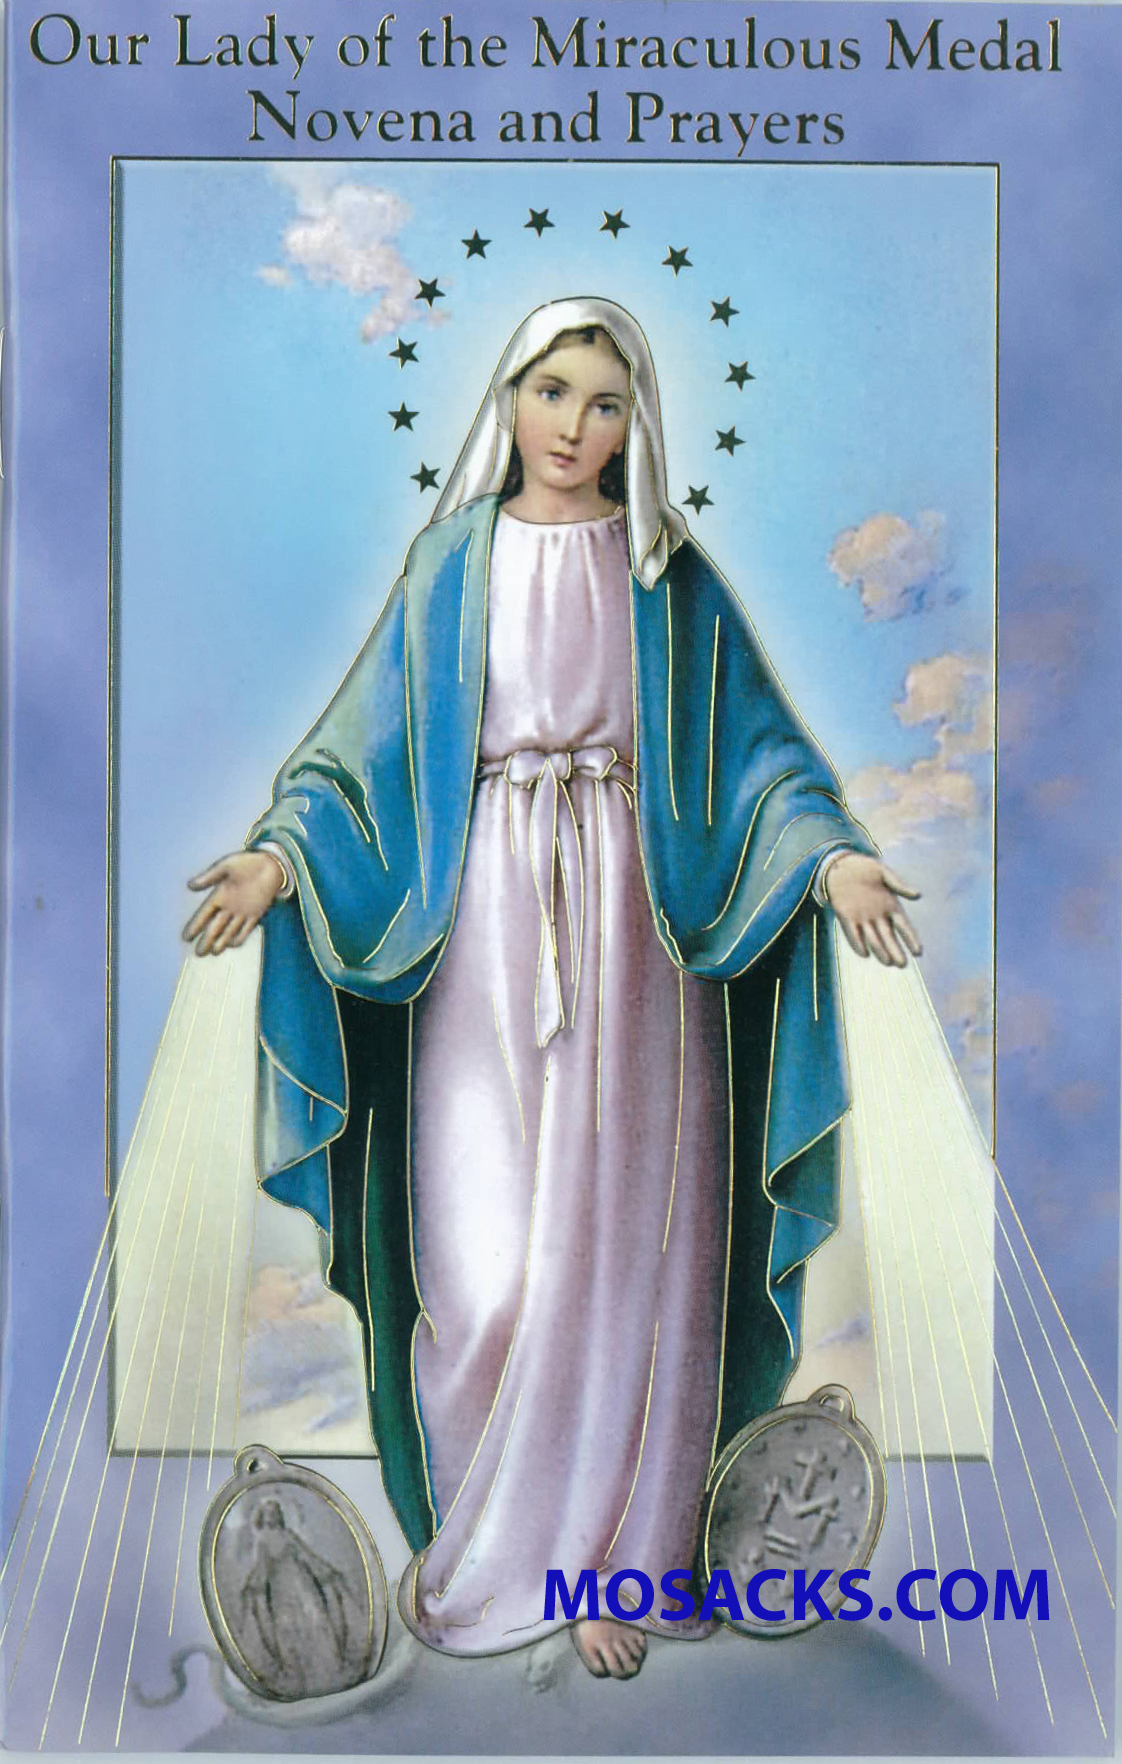 Our Lady of the Miraculous Medal Novena Prayer Book 12-2432-253